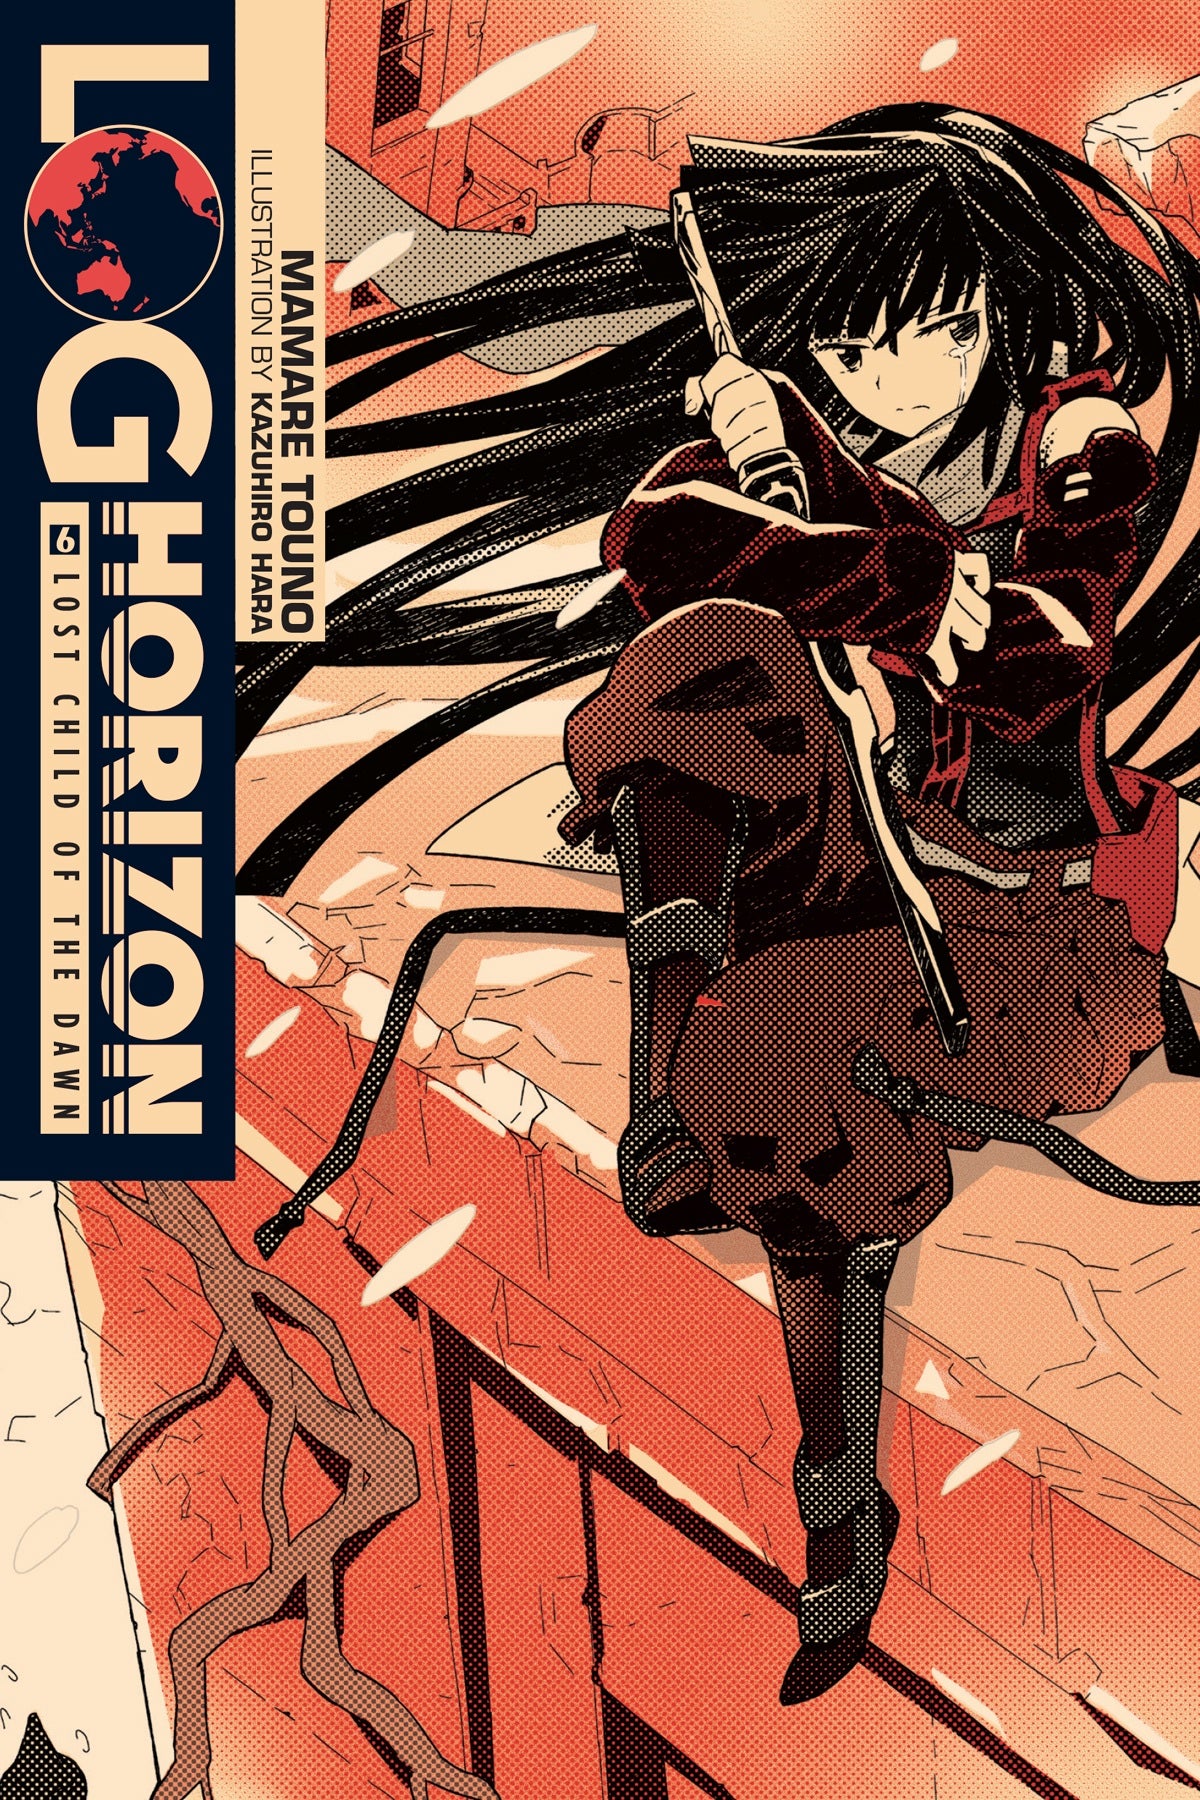 Log Horizon Vol. 06 (Light Novel): Lost Child of the Dawn (Out of Stock Indefinitely)